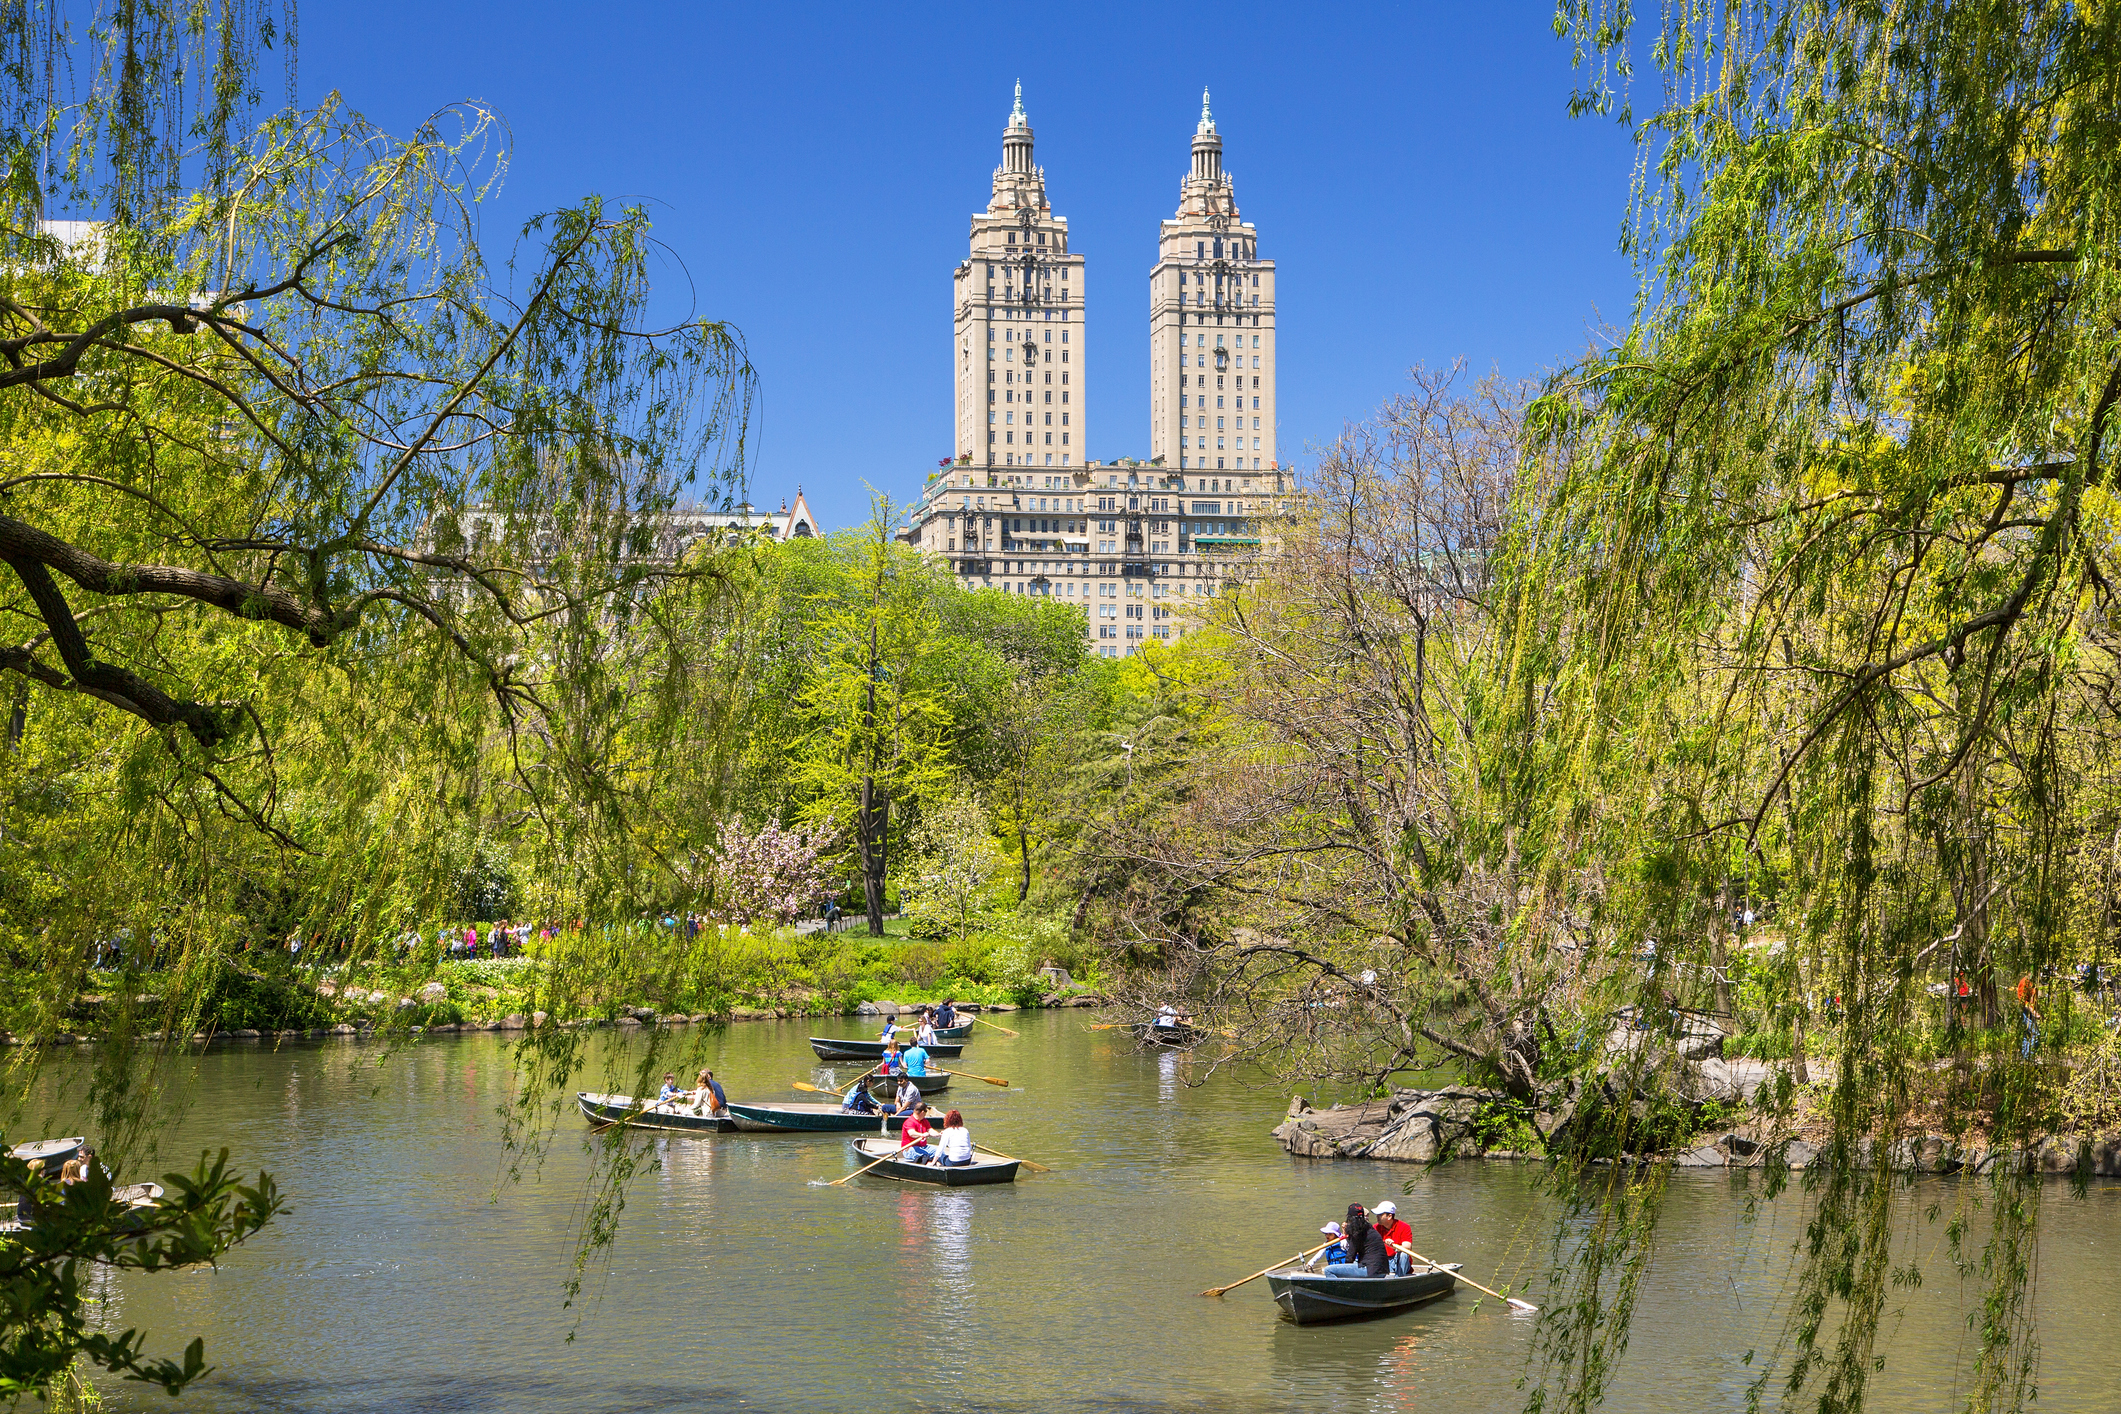 People on row boats in Central Park